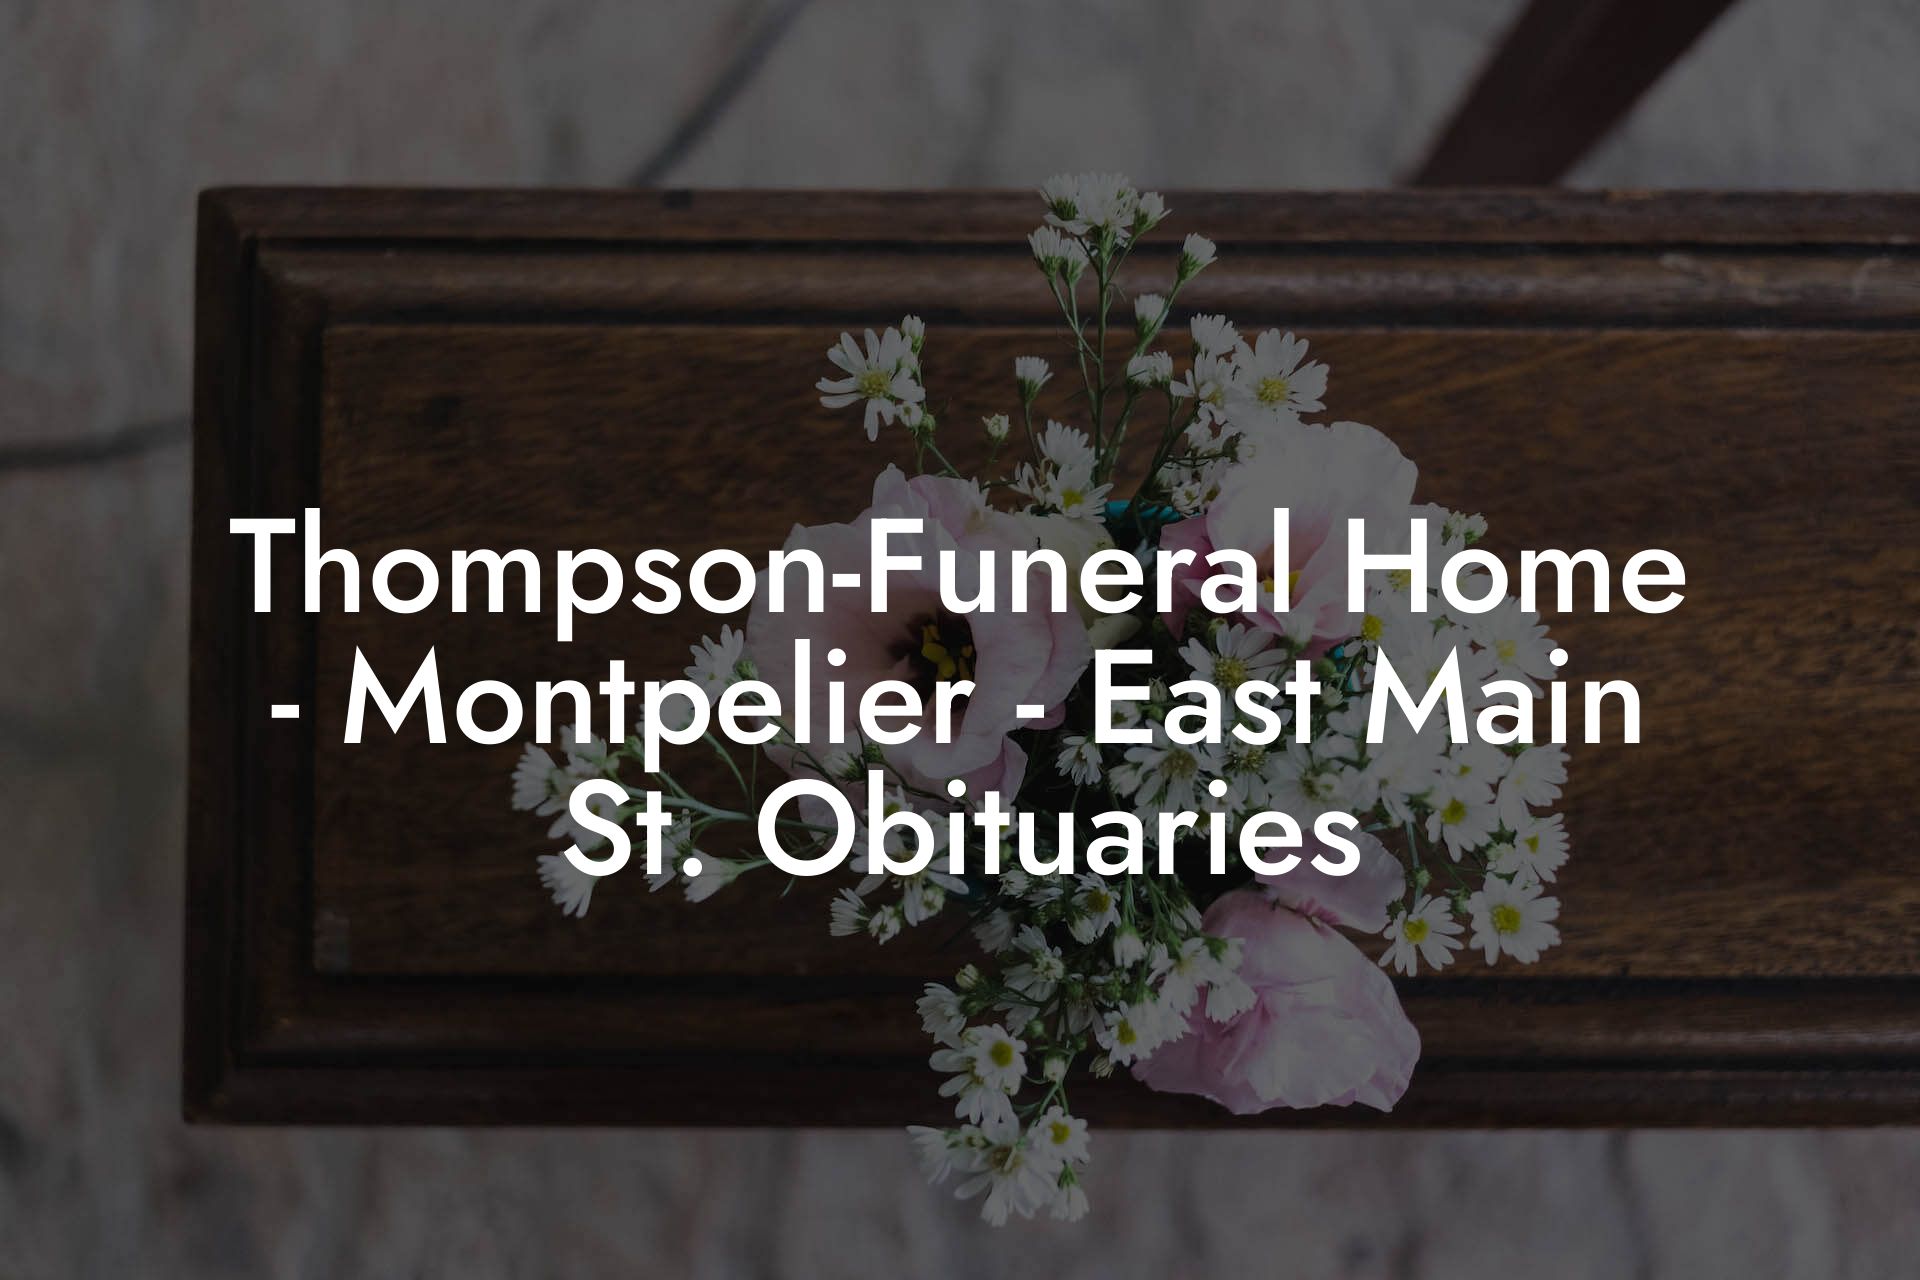 Thompson-Funeral Home - Montpelier - East Main St. Obituaries